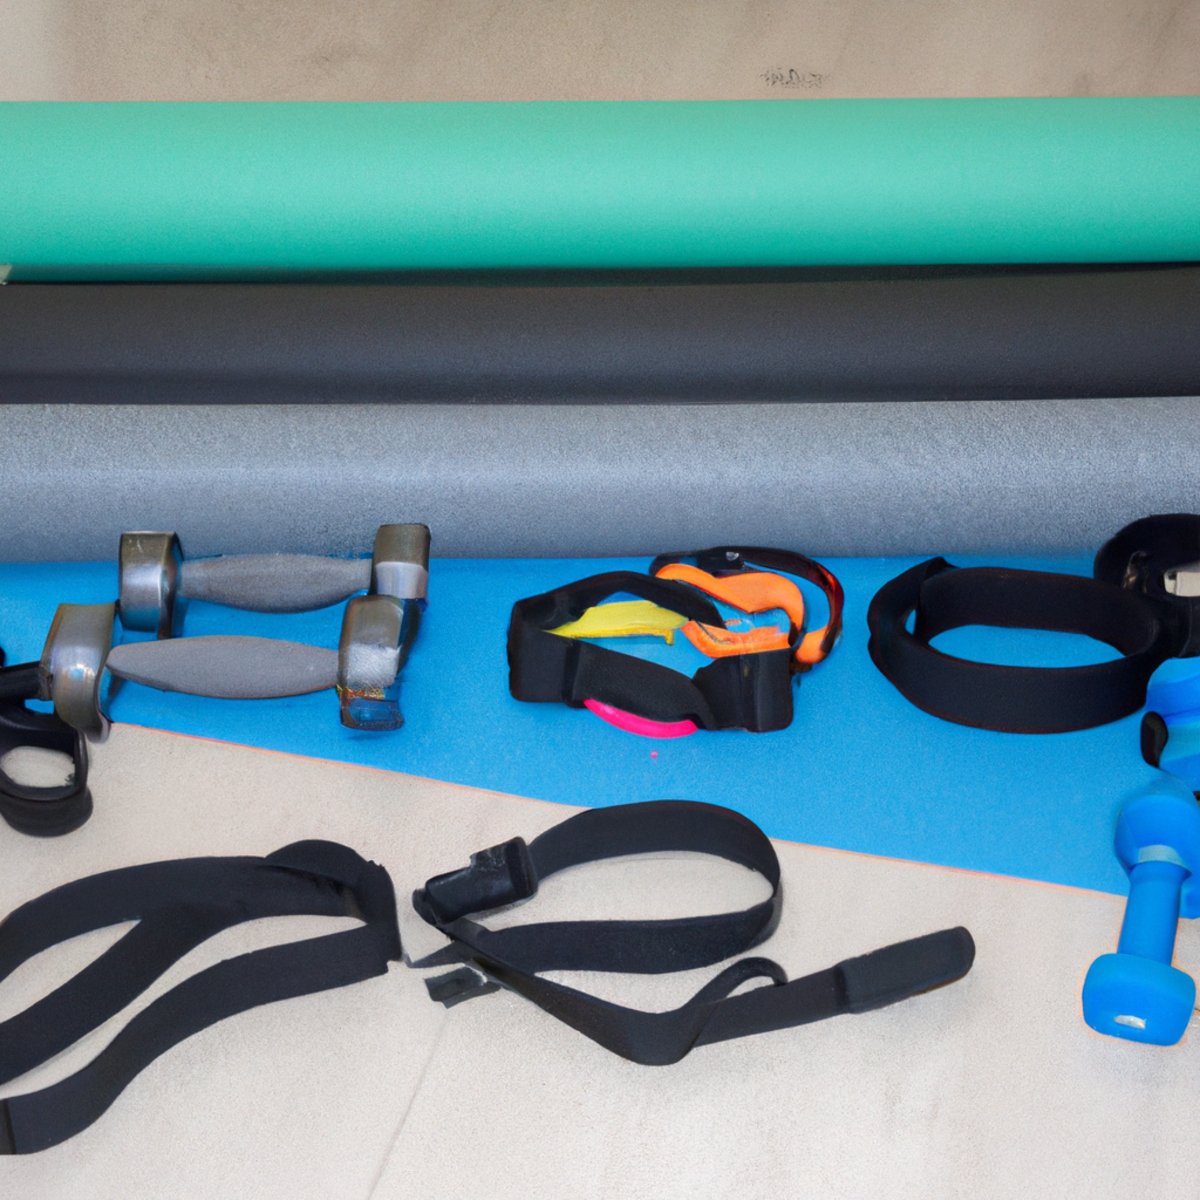 The photo shows a set of dumbbells, a resistance band, and a yoga mat laid out on the floor. The dumbbells are of different weights, ranging from light to heavy, and are placed neatly in a row. The resistance band is stretched out and attached to a door handle, ready for use. The yoga mat is rolled out and positioned in front of the dumbbells and resistance band, indicating that it is the designated workout area. The lighting in the photo is bright and natural, highlighting the texture and details of the objects. Overall, the photo conveys a sense of readiness and accessibility for beginners looking to start their resistance training journey.